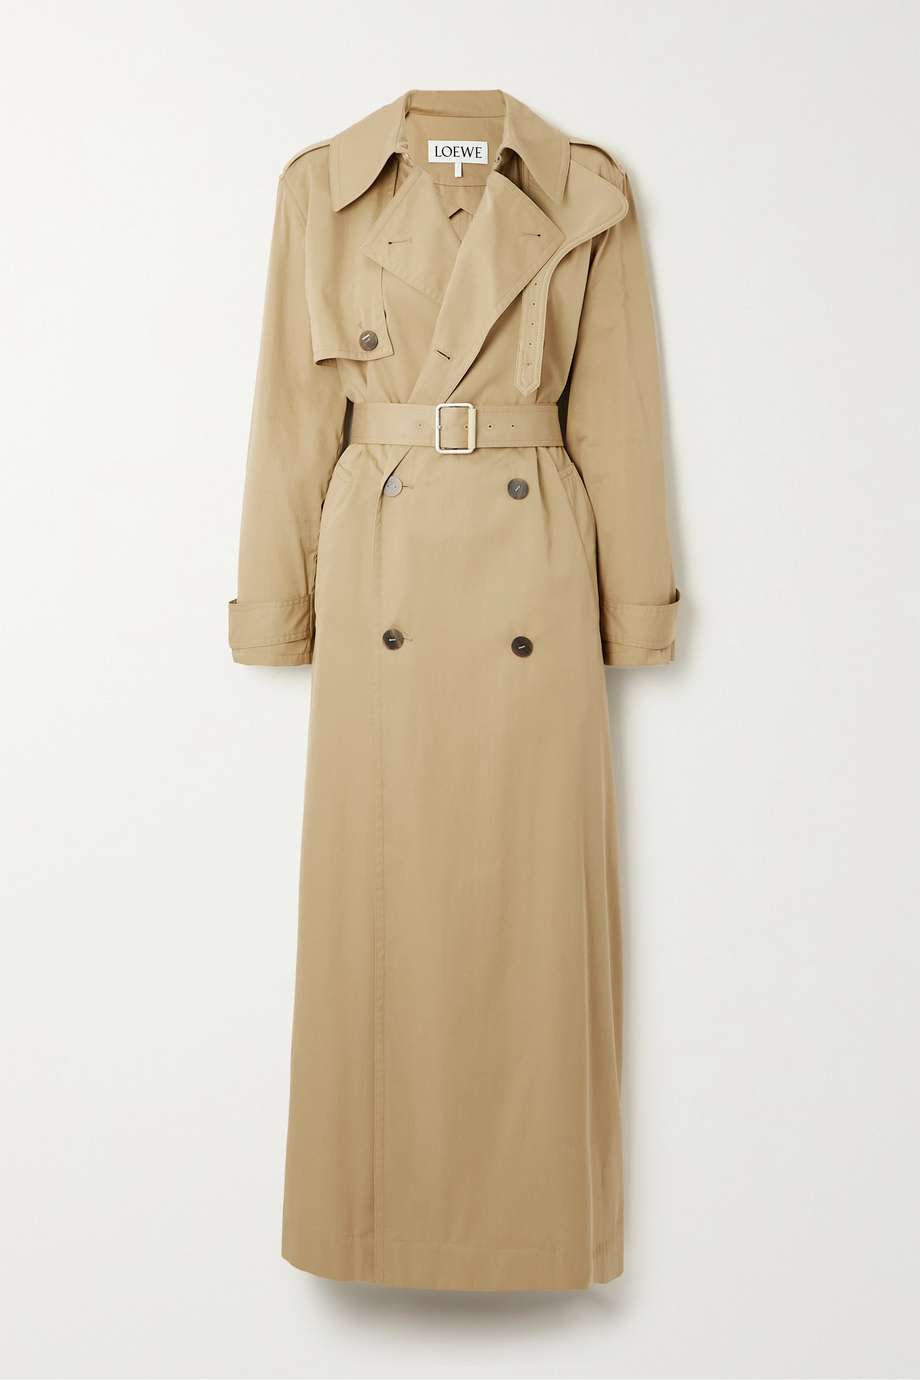 Loewe Double-Breasted Belted Cotton-Silk Trench Coat